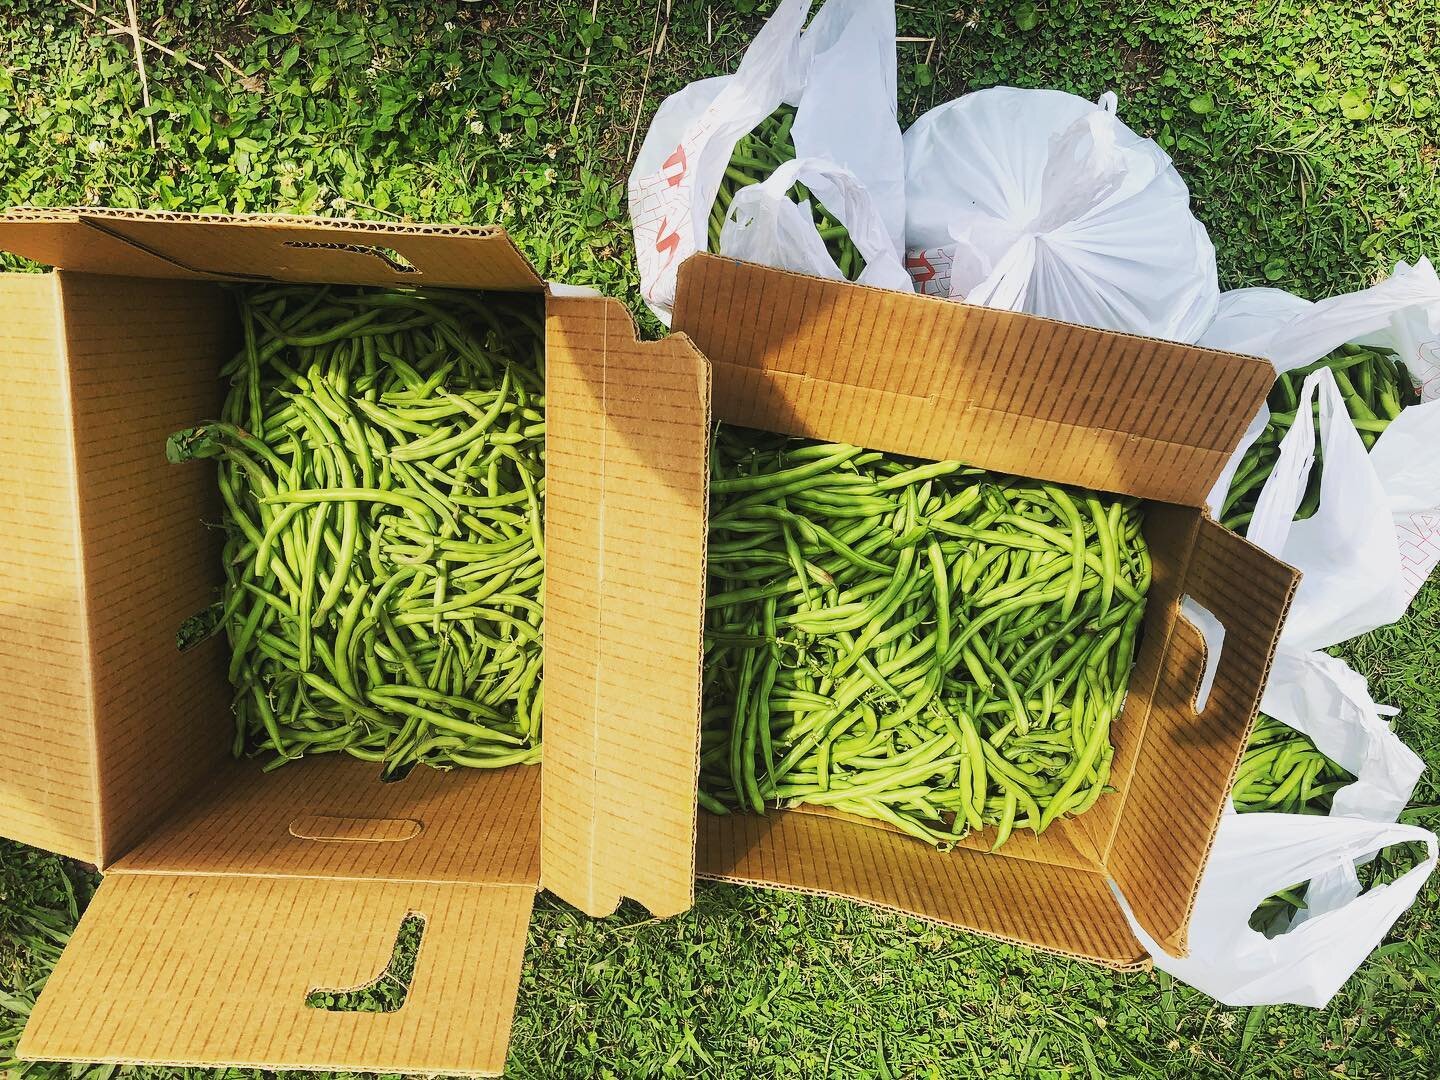 Today&rsquo;s harvest: 5️⃣0️⃣ lbs. of green beans! More on the way later this week. Join us this later this week! #farmchurchdurham #farm #church #durham #foodsecurity #connect #produce #harvest #summergarden